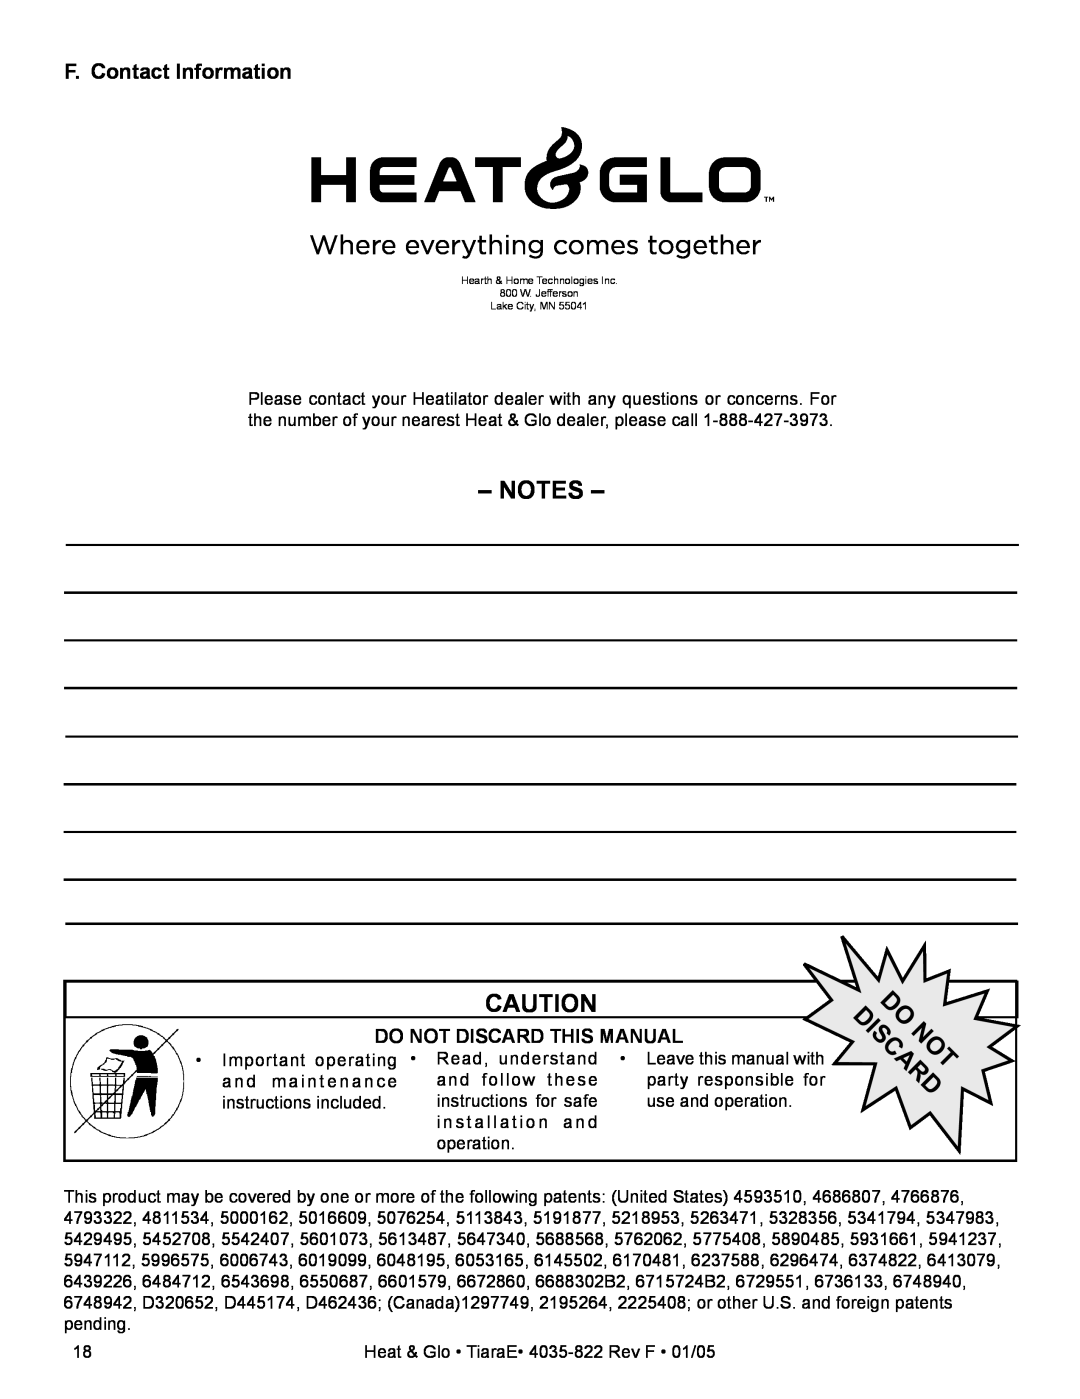 Heat & Glo LifeStyle TiaraE 4035-822 manual F. Contact Information, Do Discnot Ard, Do Not Discard This Manual 